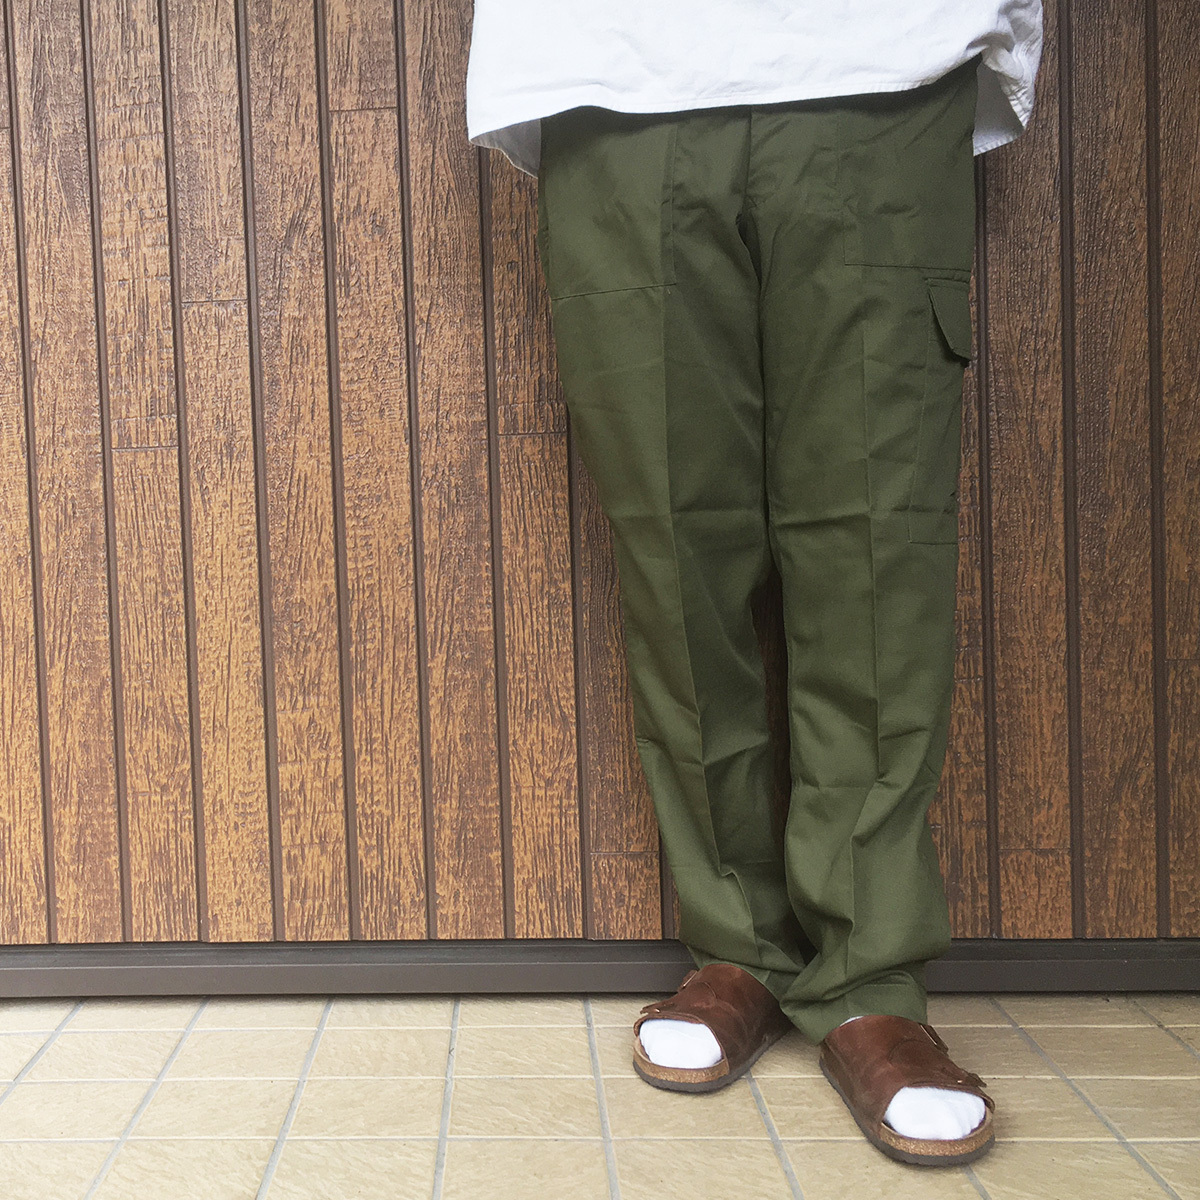 [DEADSTOCK BRITISH ARMY LIGHT WEIGHT FATIGUE PANTS ]イギリス軍 ライトウェイト ファ